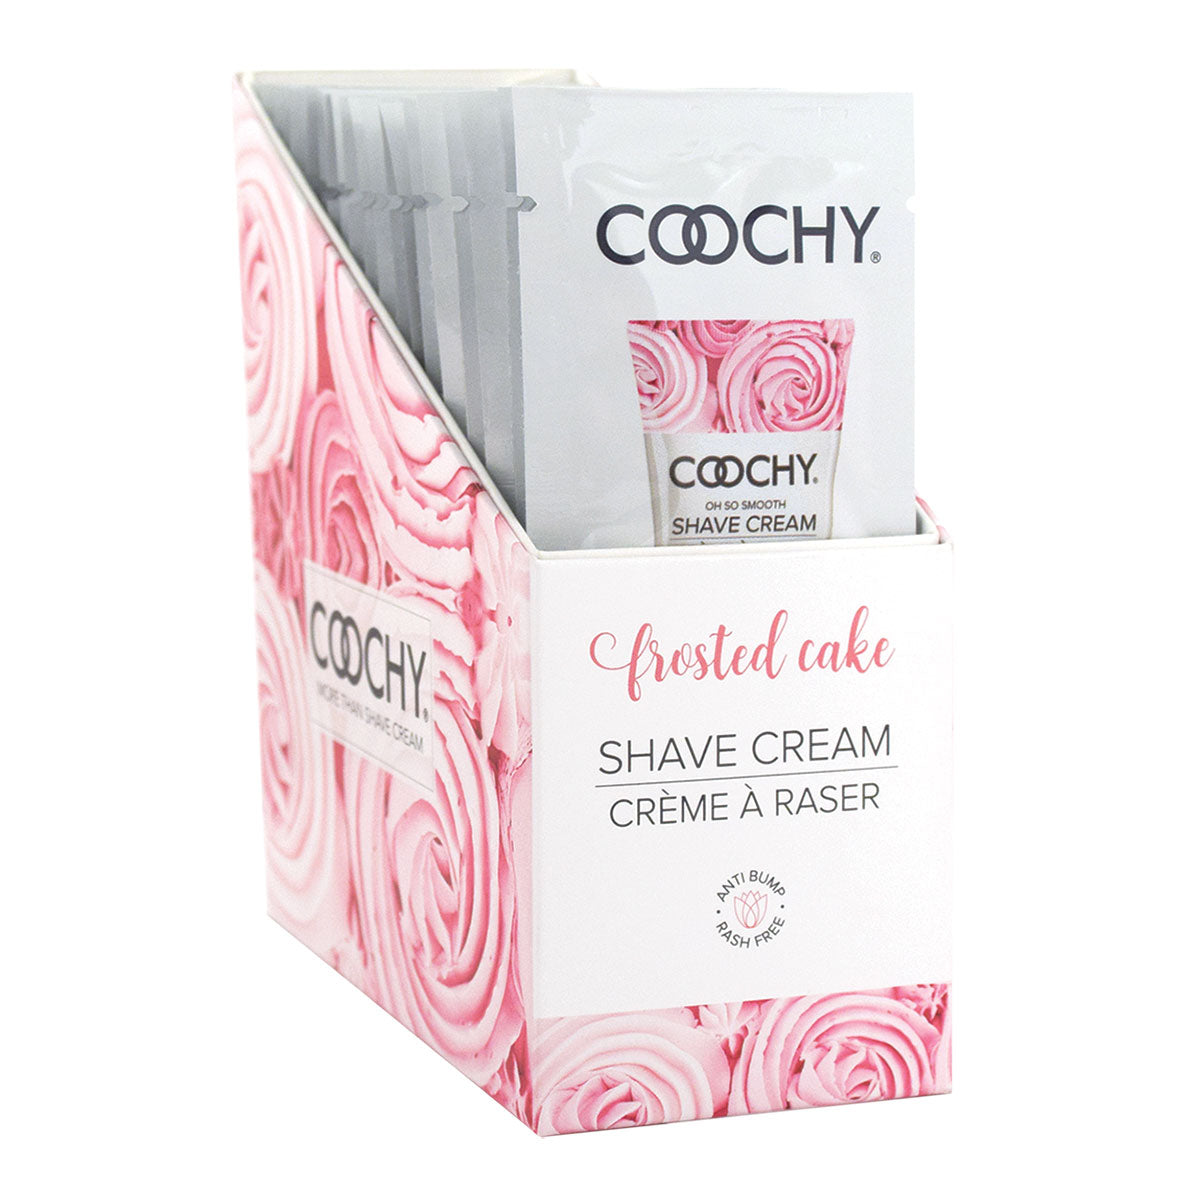 Coochy Shave Cream 15ml. 24pc. Display - Frosted Cake